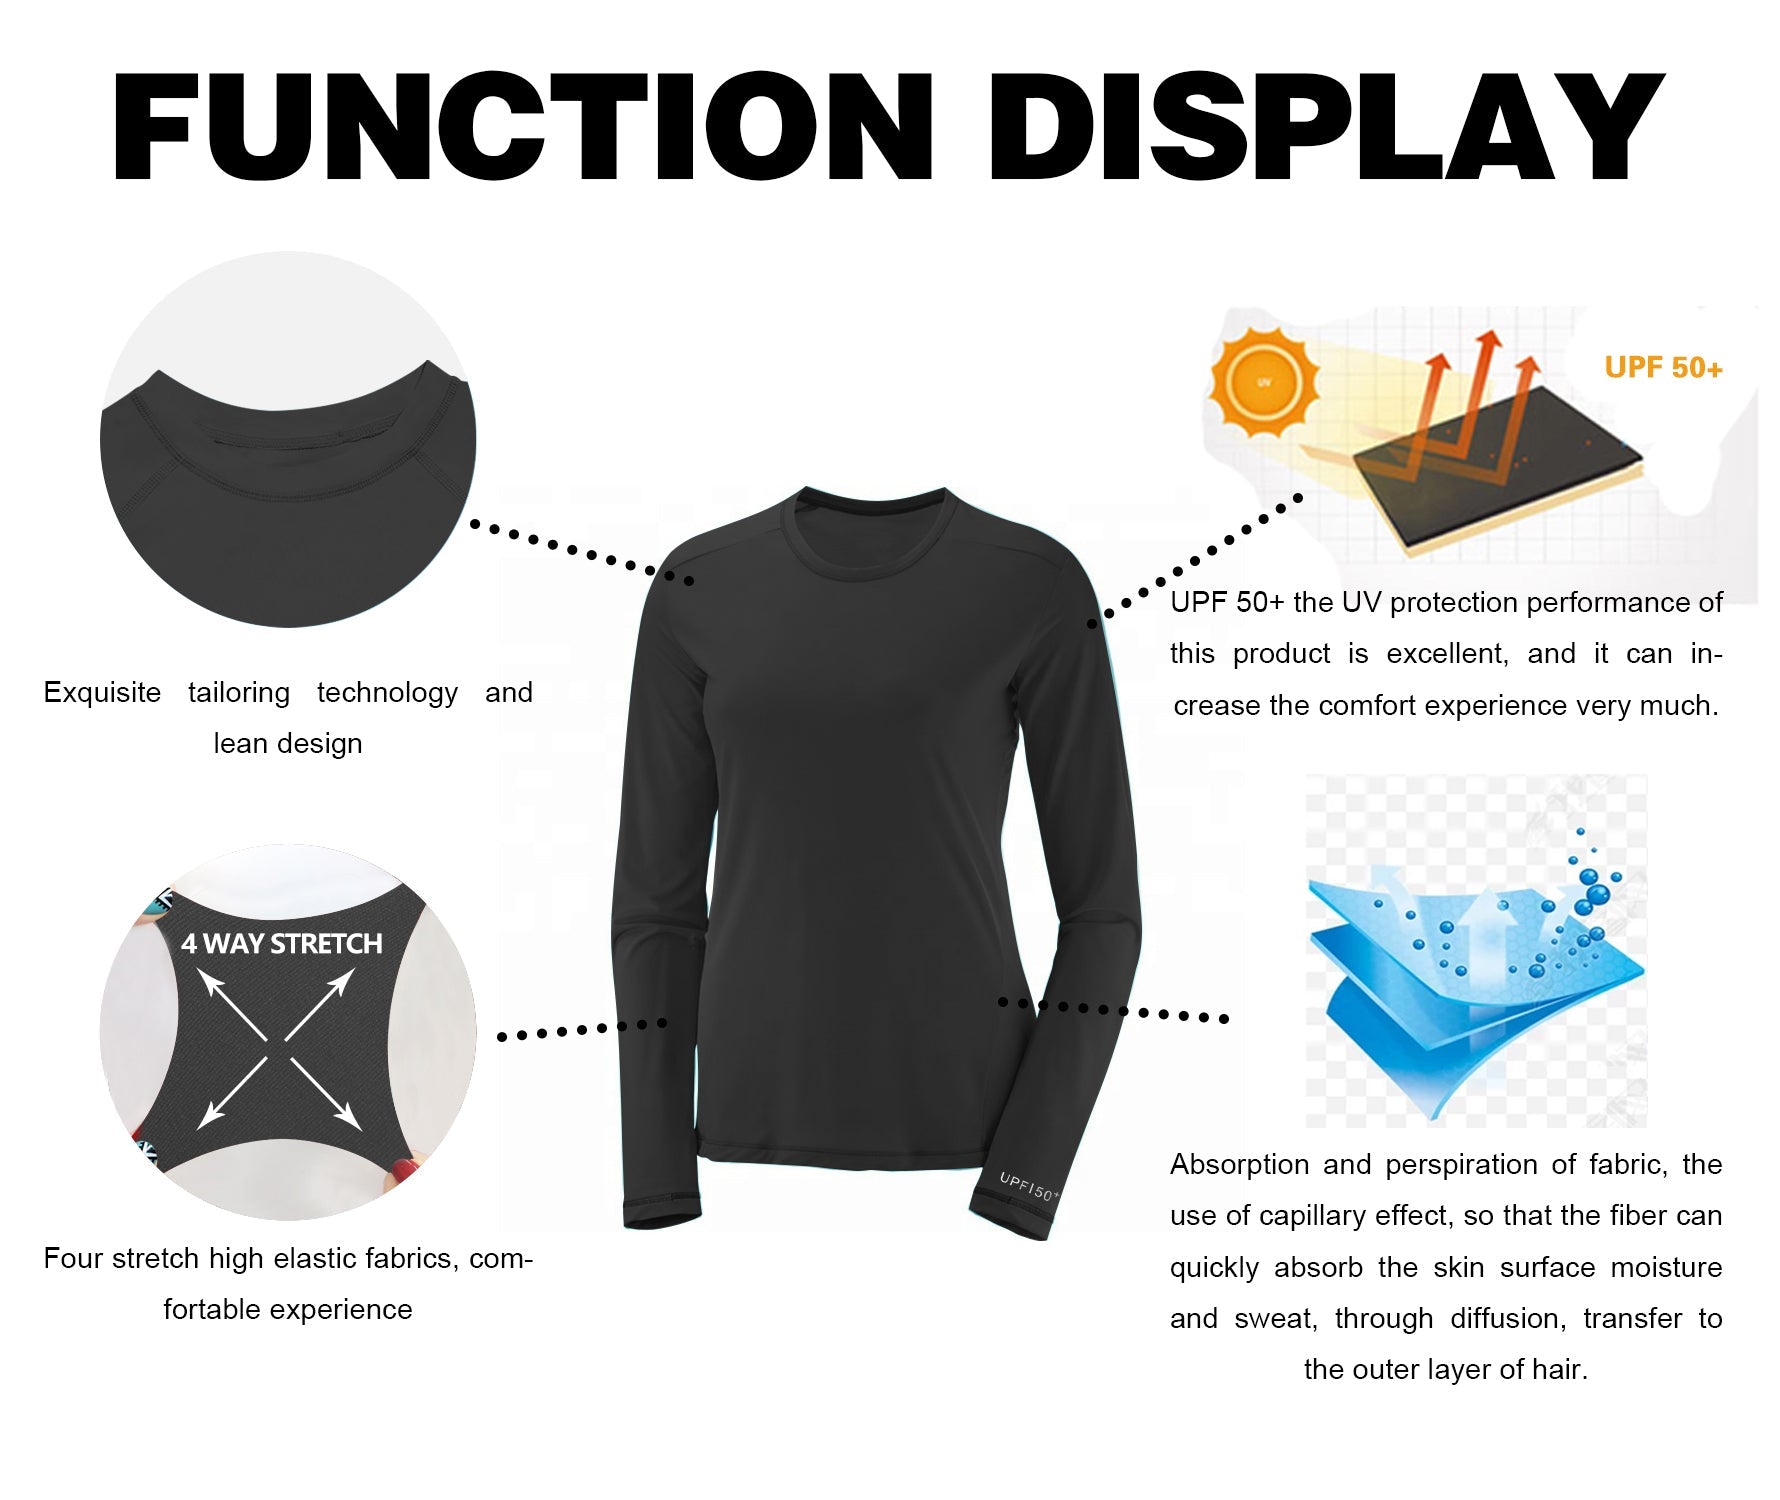 Long Sleeve UPF 50+ Rashguard shadowcharcoal 84%Polyester/16%Spandex Fitted design Dries ultra-fast UV Protection: UPF 50 sun protection